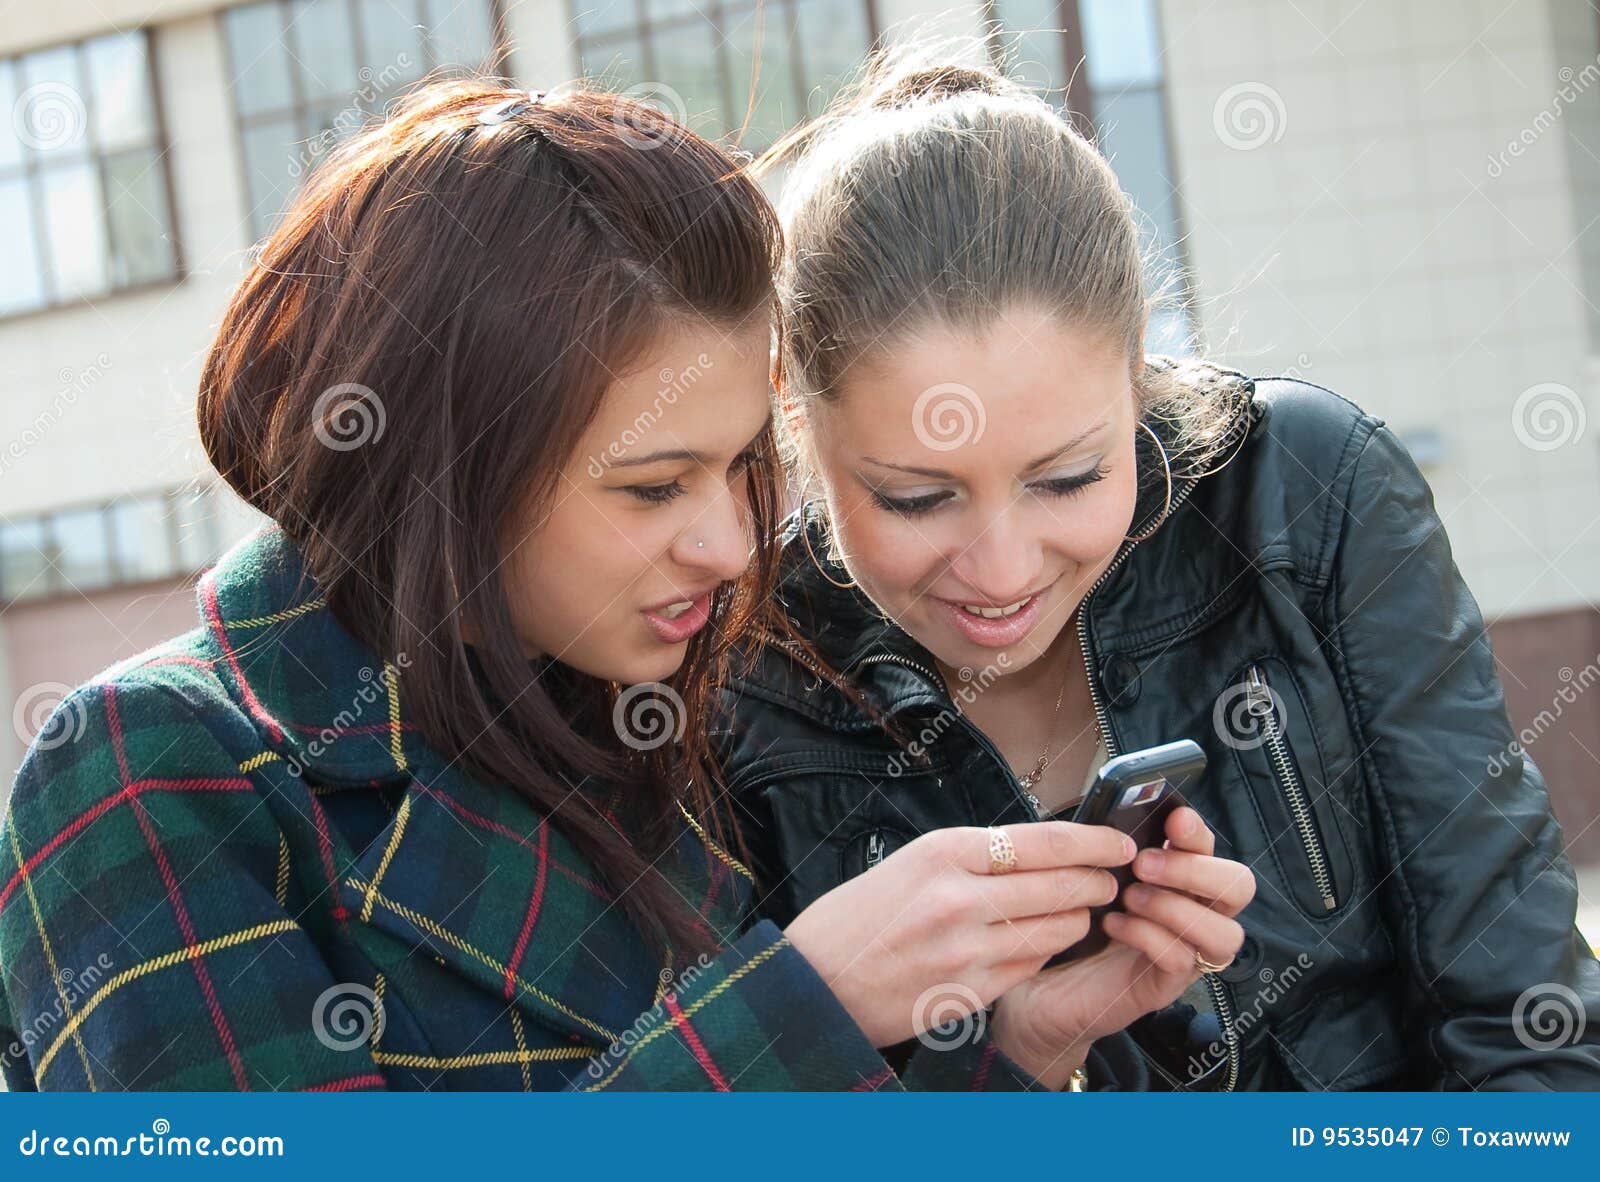 girls watching each other nude photo